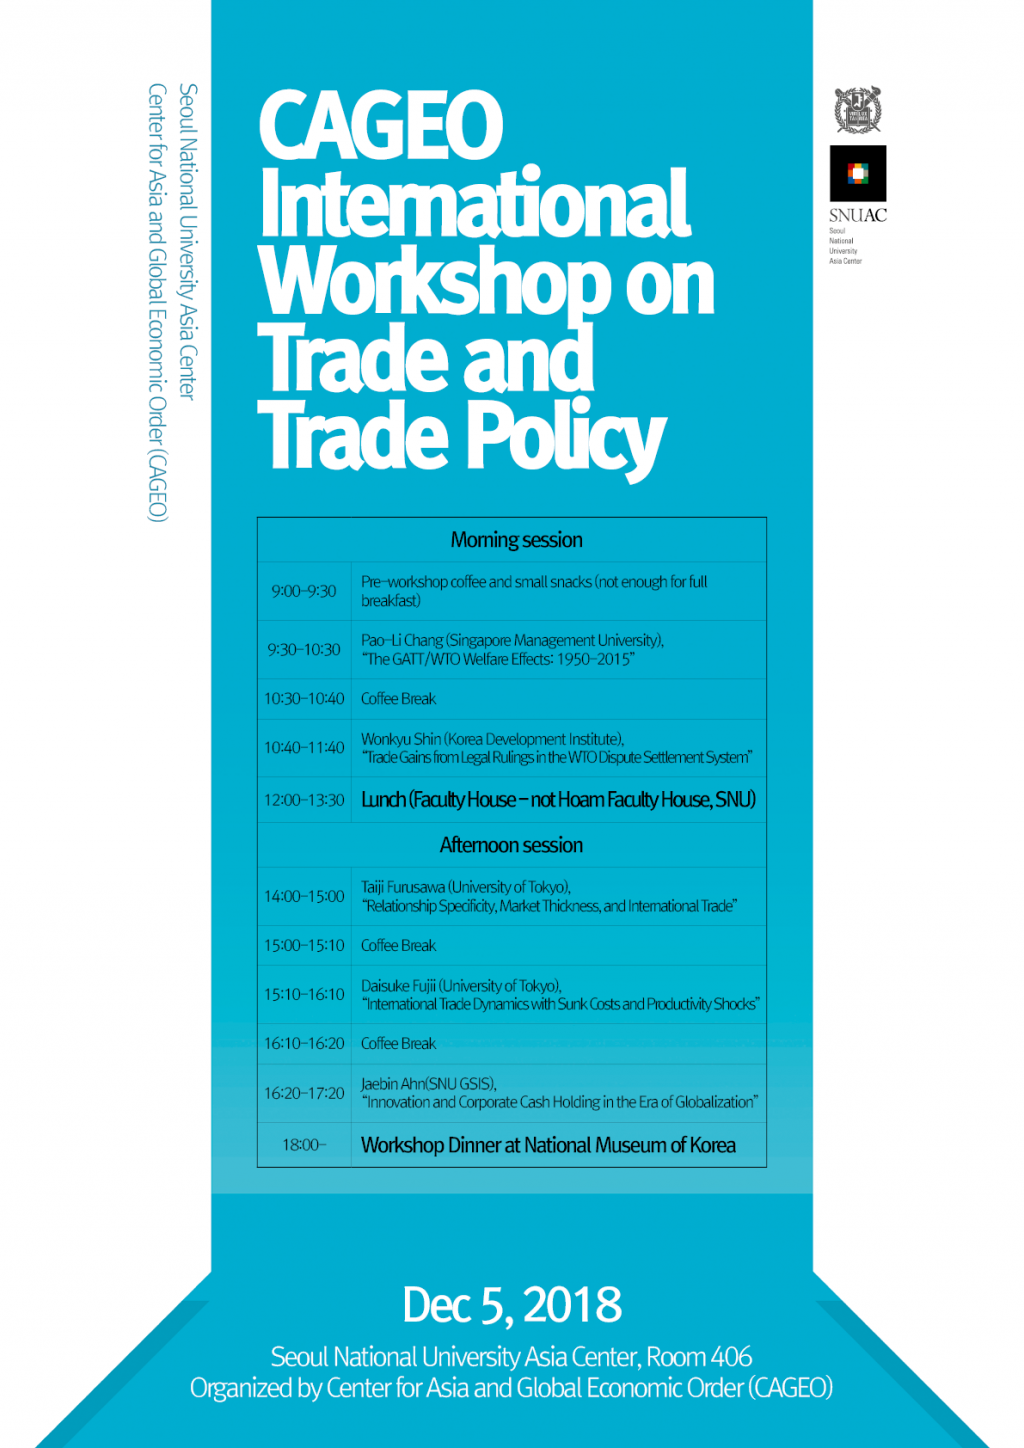 CAGEO International Workshop on Trade and Trade Policy